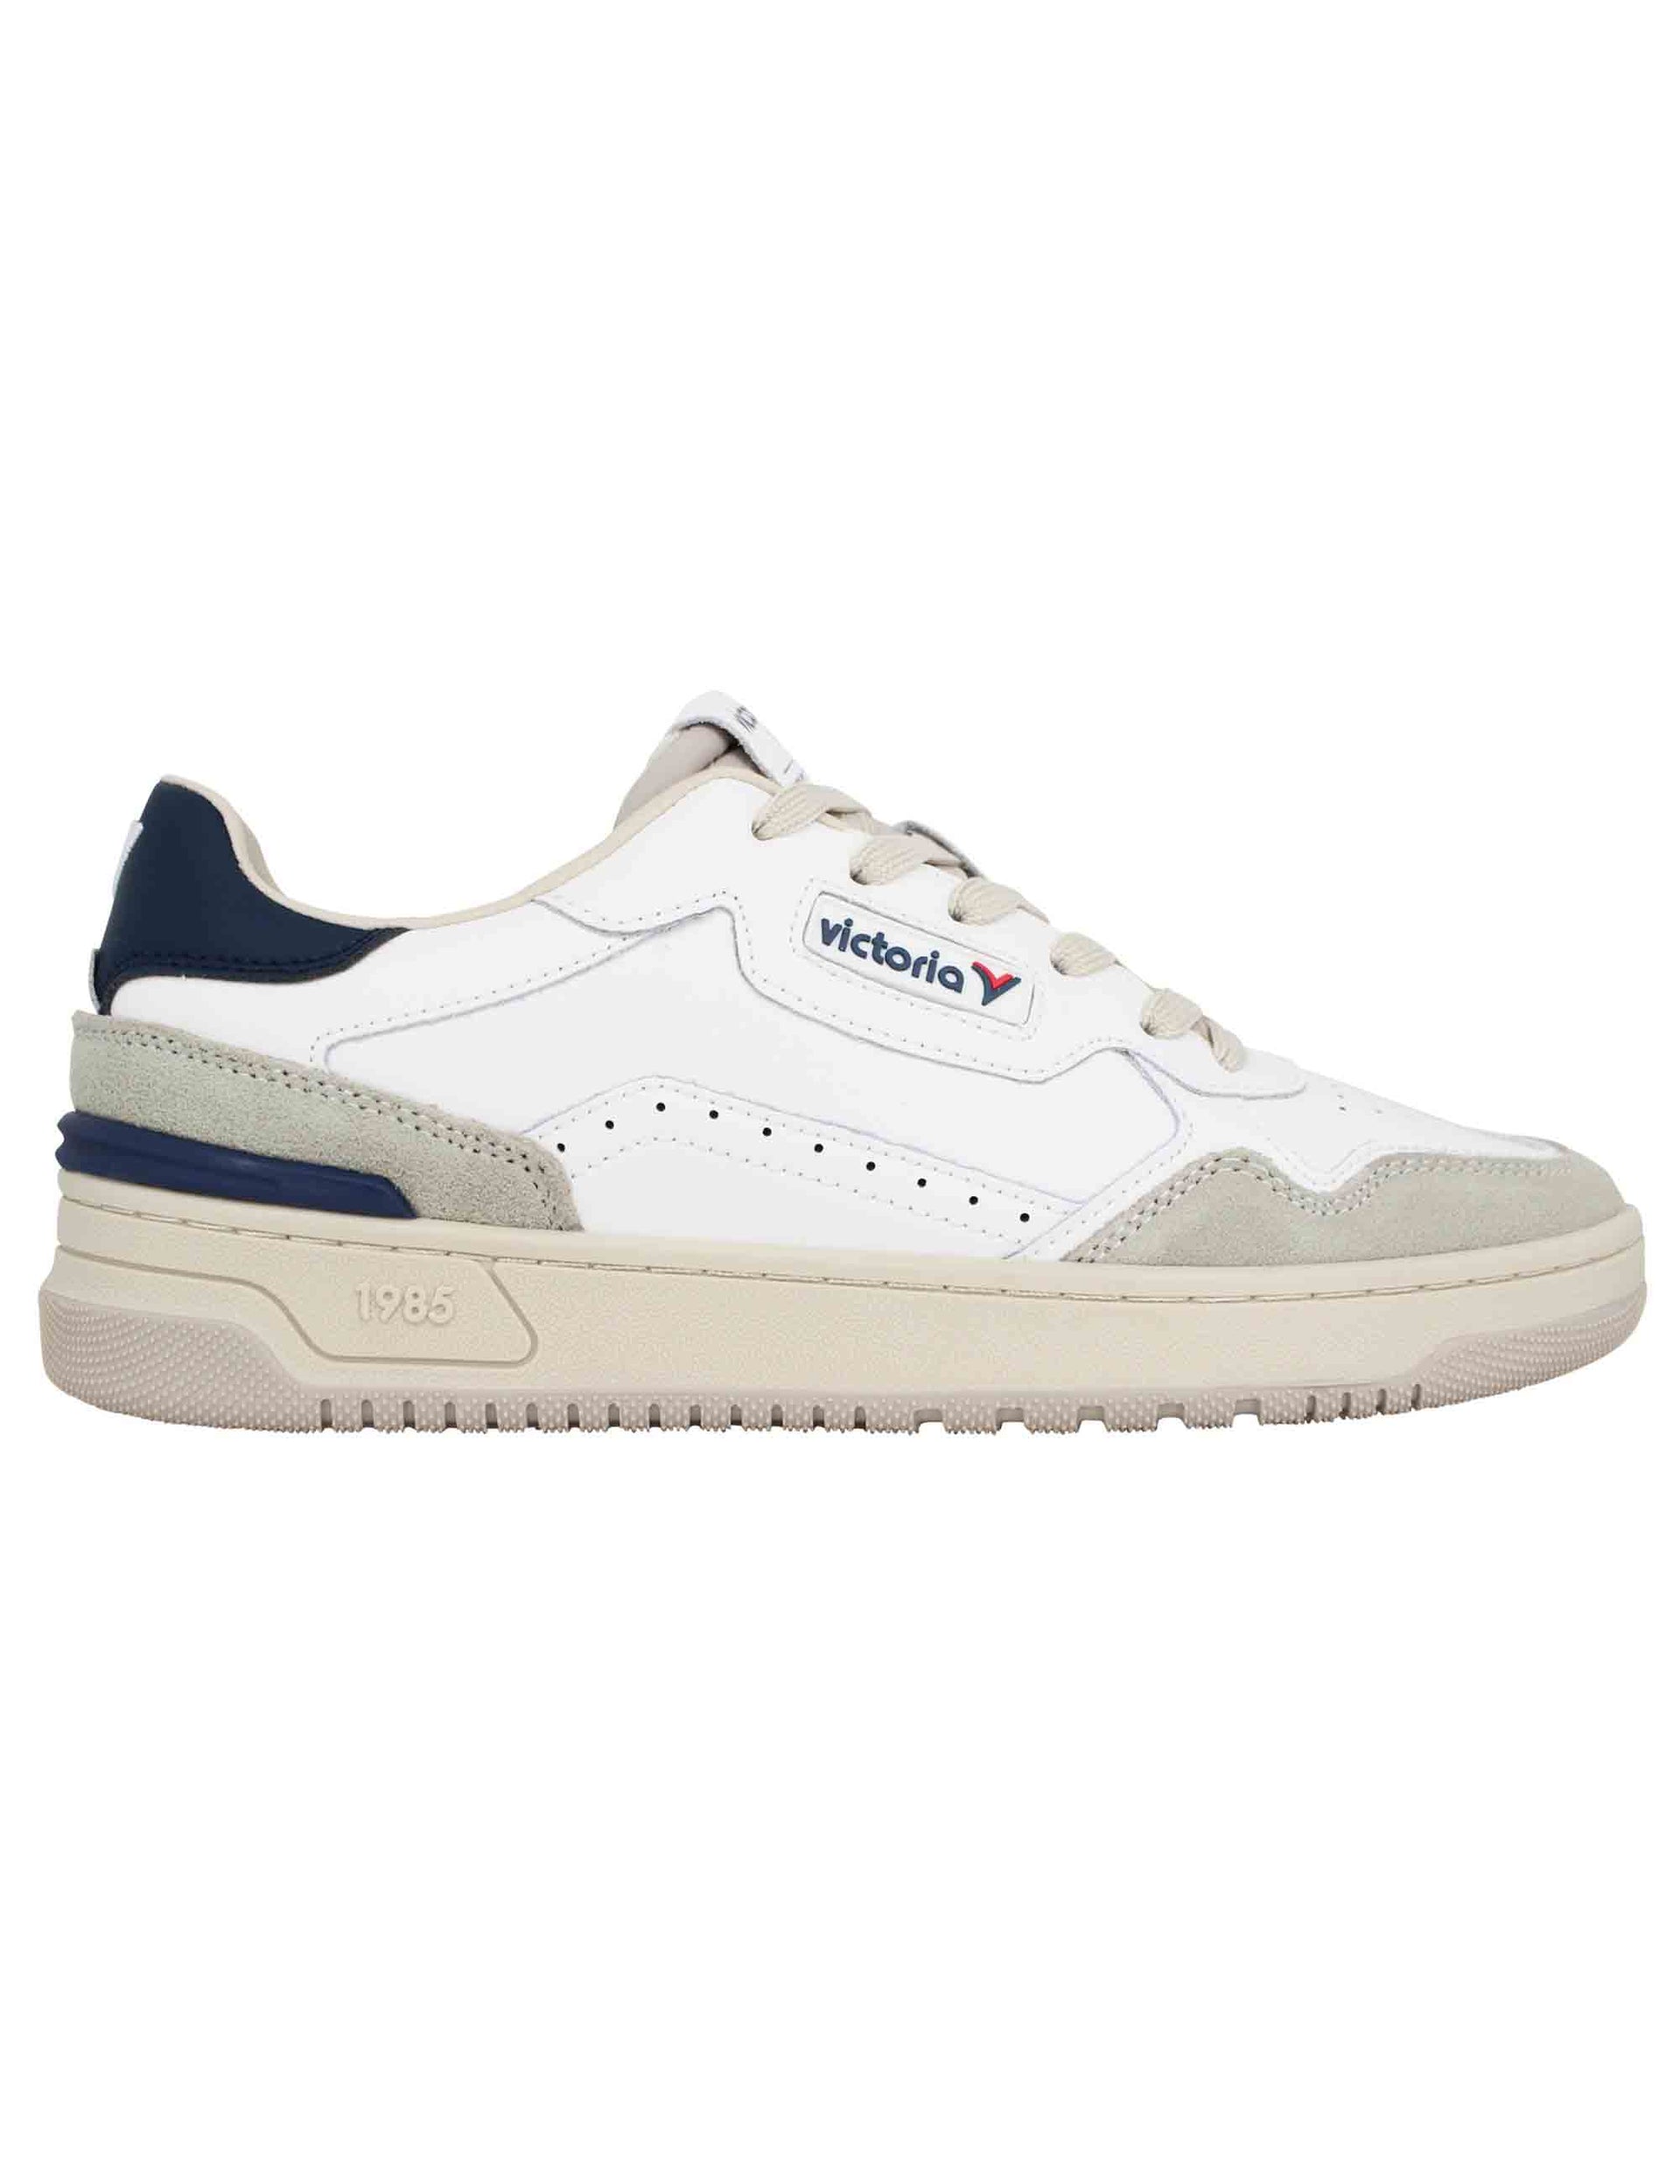 Men's sneakers in white leather with blue inserts